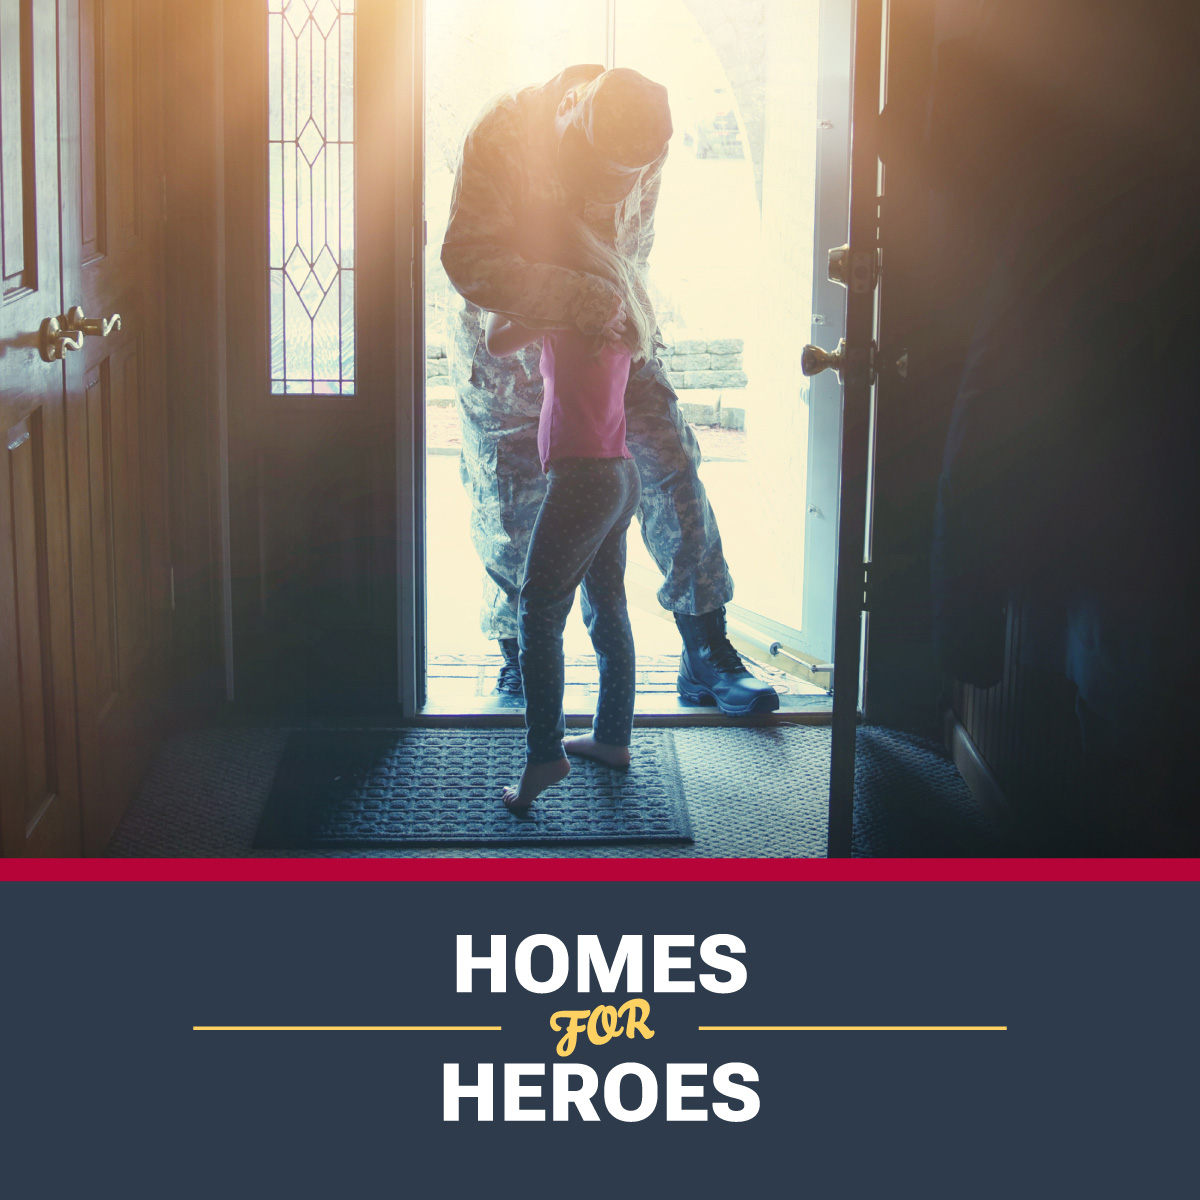 All heroes deserve a home with a VA loan. Call our Acadia Lending Group team today to find out how much home you can afford. #Heroes #VALoan #Veterans #USVeteran 

NMLS 370636
(207) 899-4500